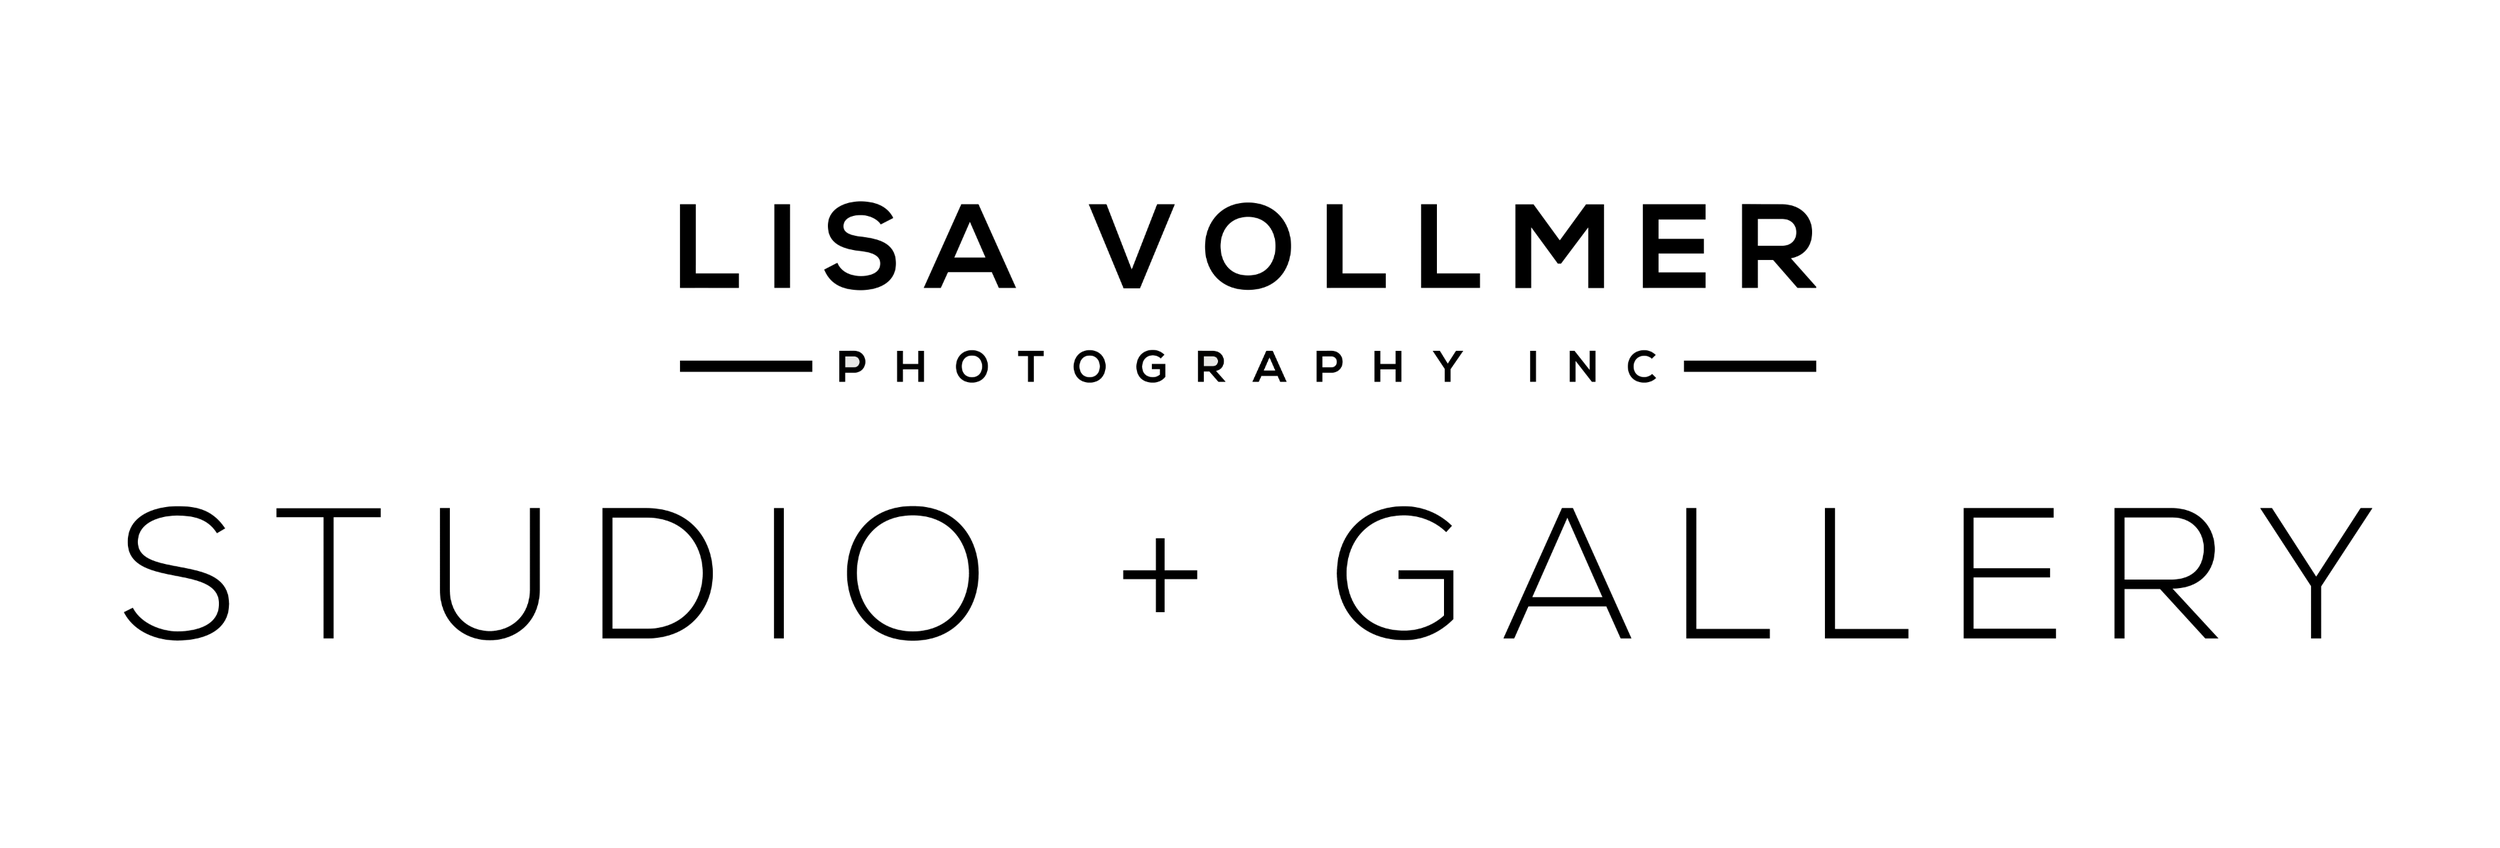 LISA VOLLMER PHOTOGRAPHY